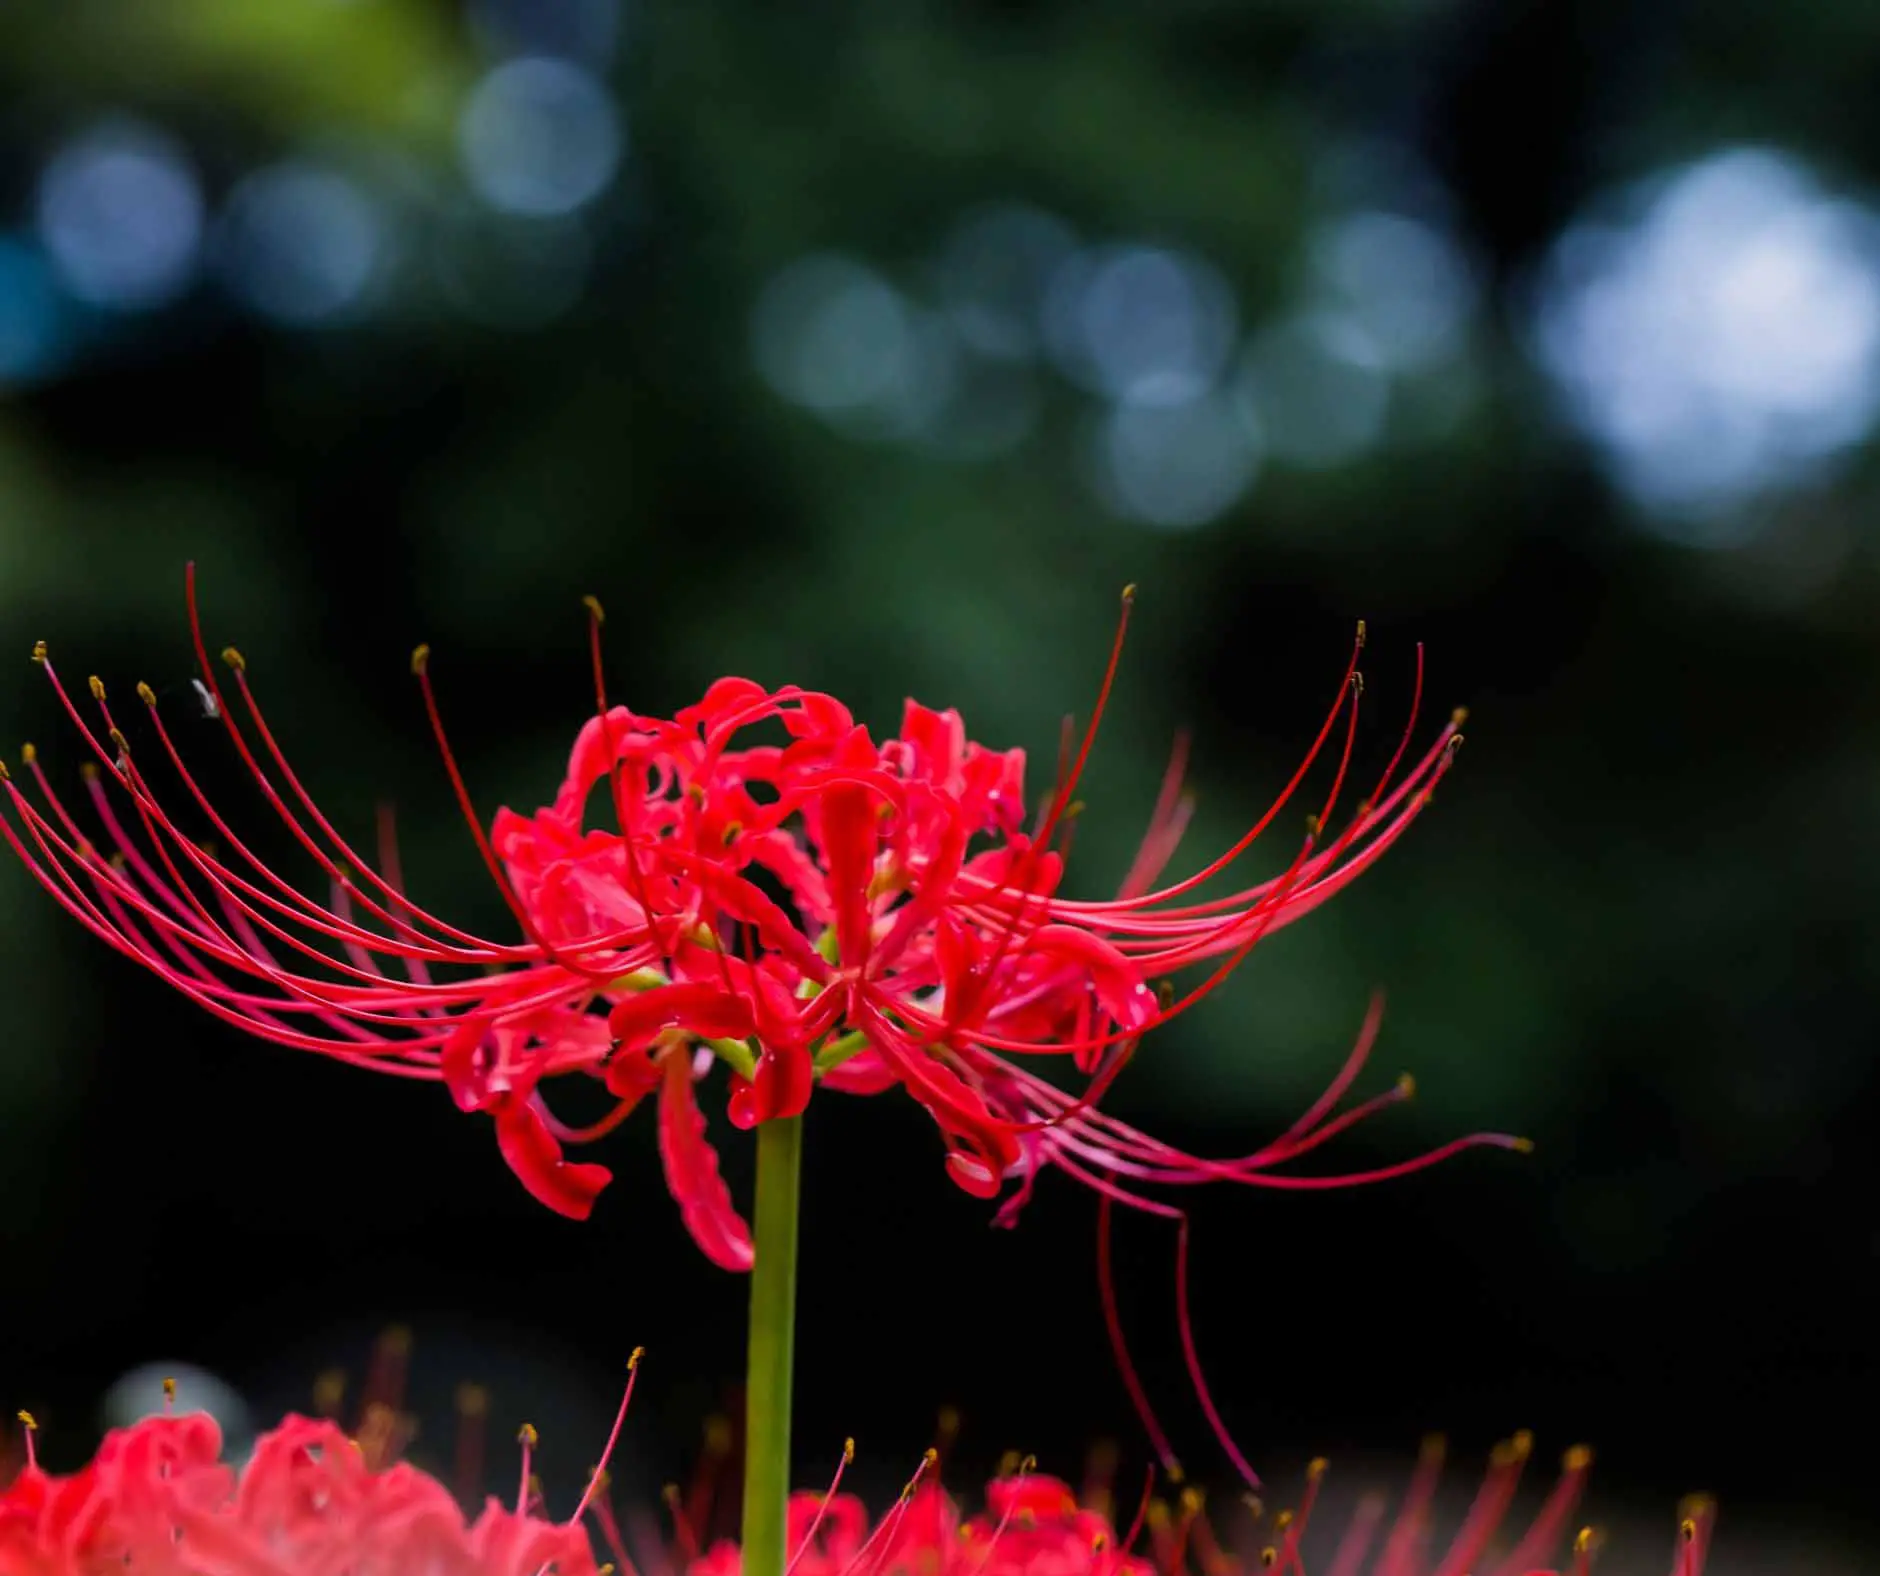 Red spider lily flower